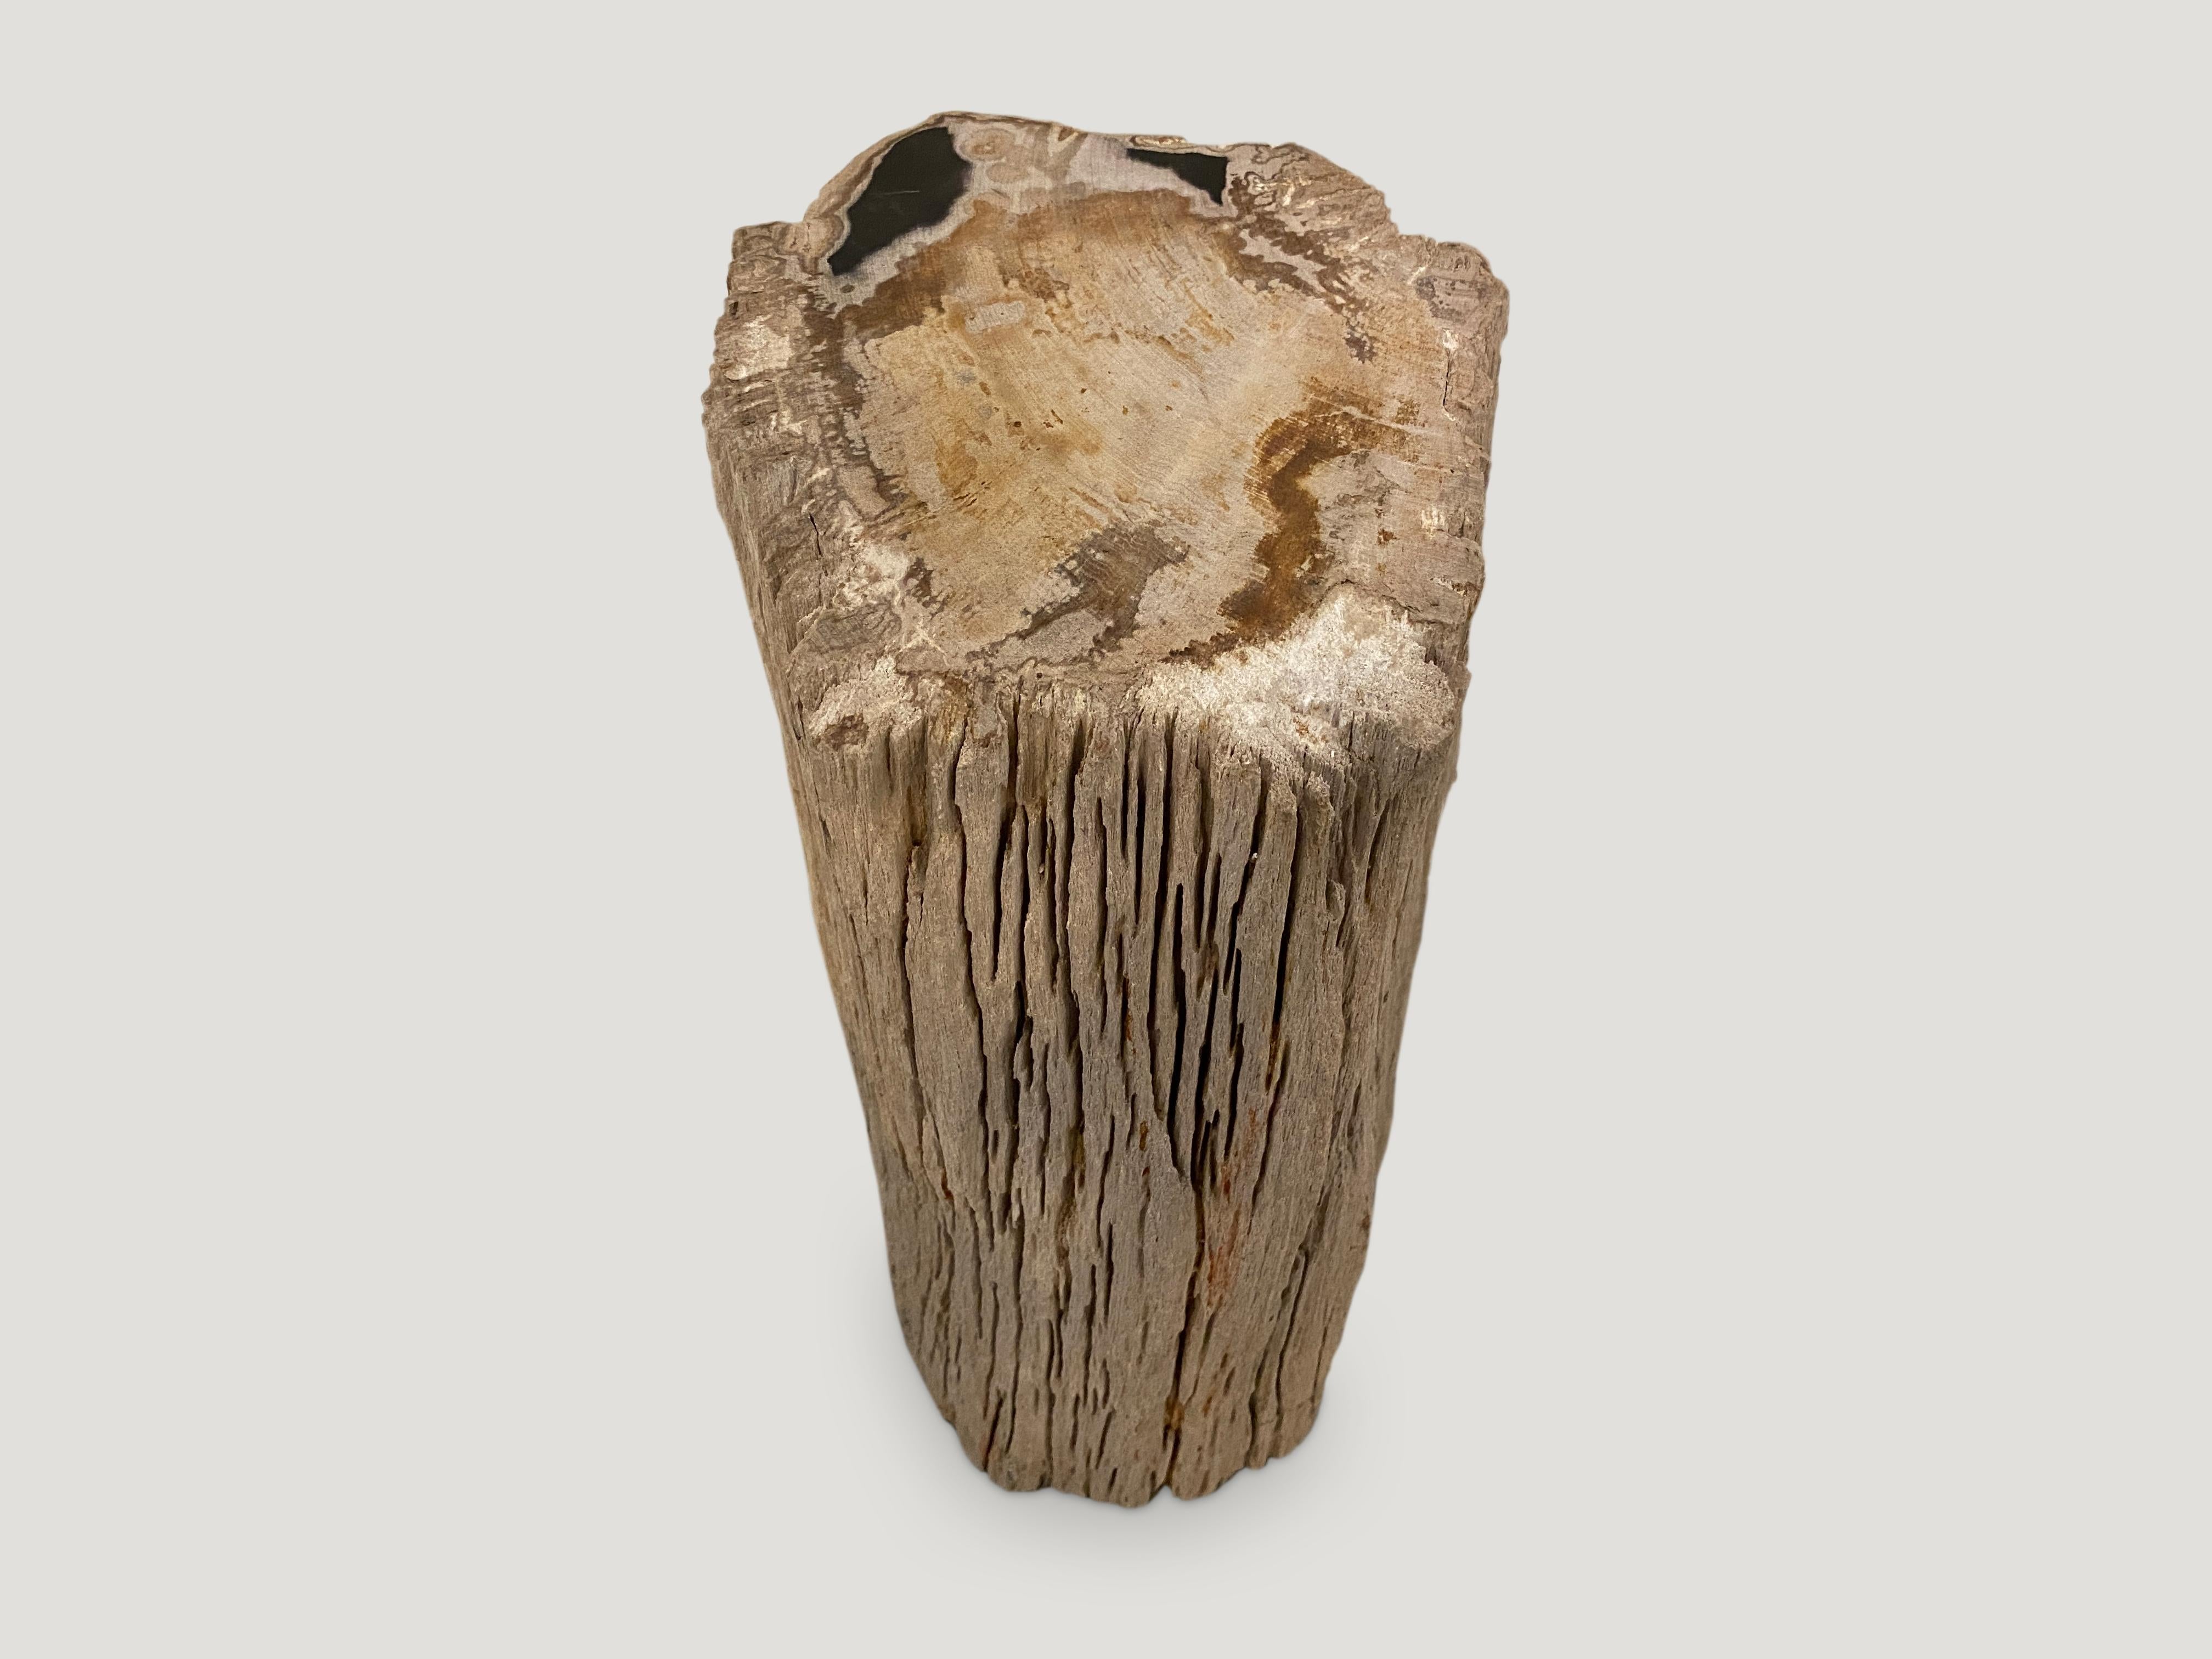 We have left the sides raw and polished the top of this petrified wood side table.

As with a diamond, we polish the highest quality fossilized petrified wood, using our latest ground breaking technology, to reveal its natural beauty and